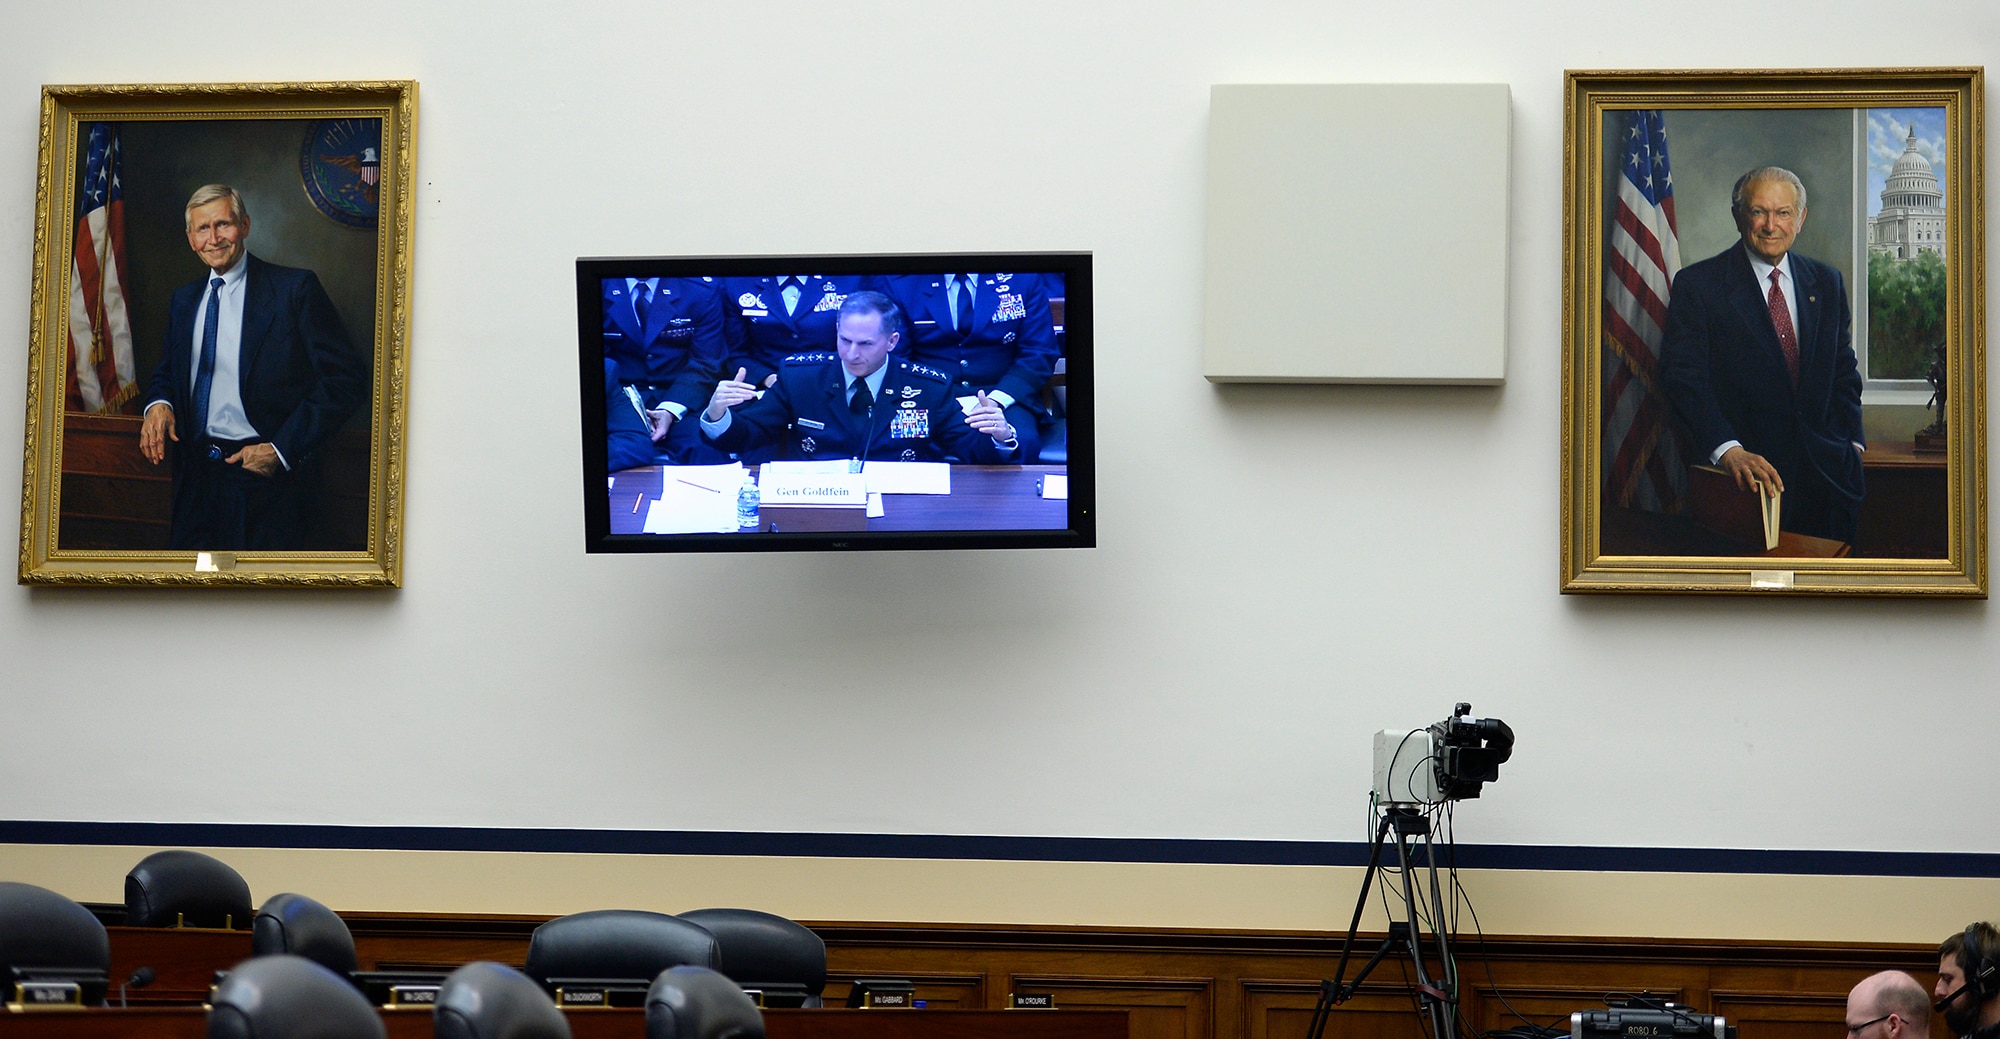 Air Force Vice Chief of Staff Gen. David Goldfein testifies before the House Armed Services Committee on the current readiness of the service in Washington, D.C., Feb. 12, 2016. Testifying with him were Lt. Gen. John Raymond, the Air Force deputy chief of staff for operations, and Lt. Gen. John Cooper, the deputy chief of staff for logistics, engineering and force protection. (U.S. Air Force photo/Scott M. Ash)
